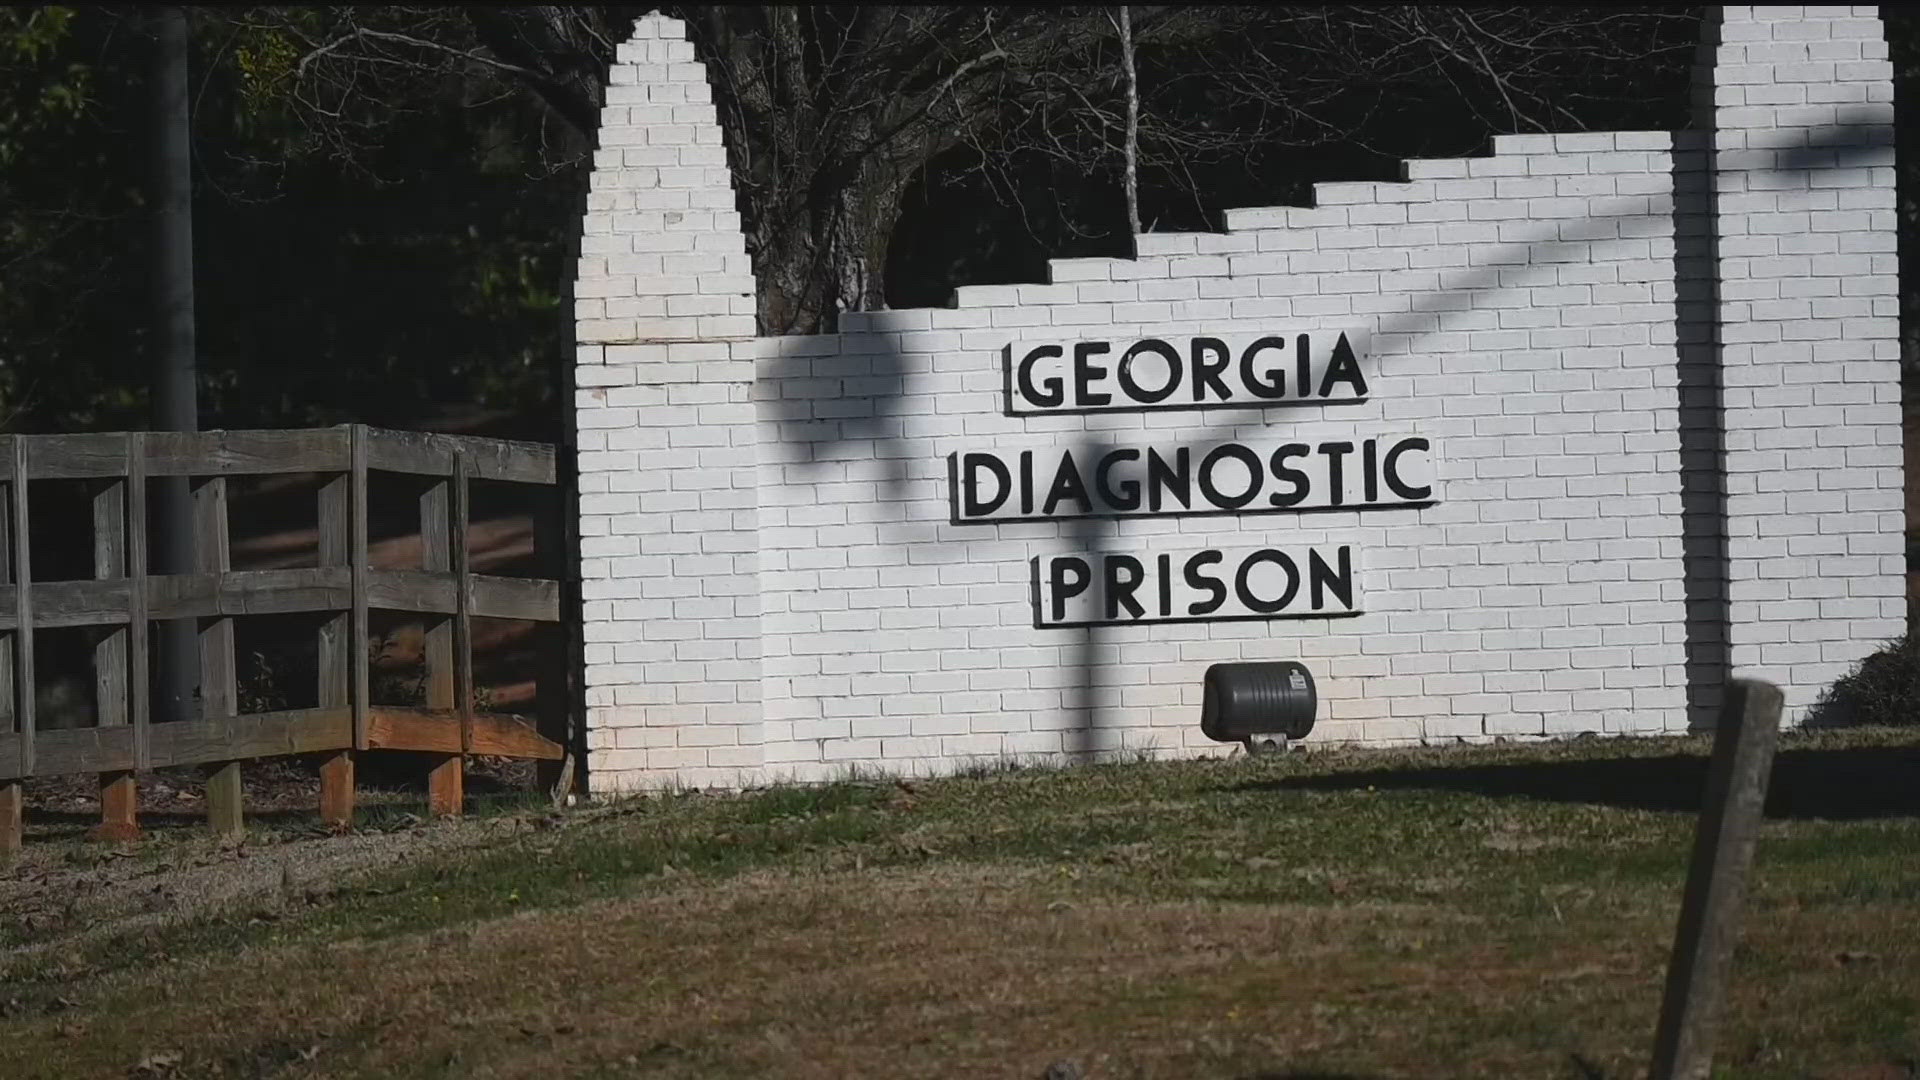 A federal judge is holding the Georgia Department of Corrections in contempt, finding the state agency failed to meet minimum safety conditions at a Georgia prison.